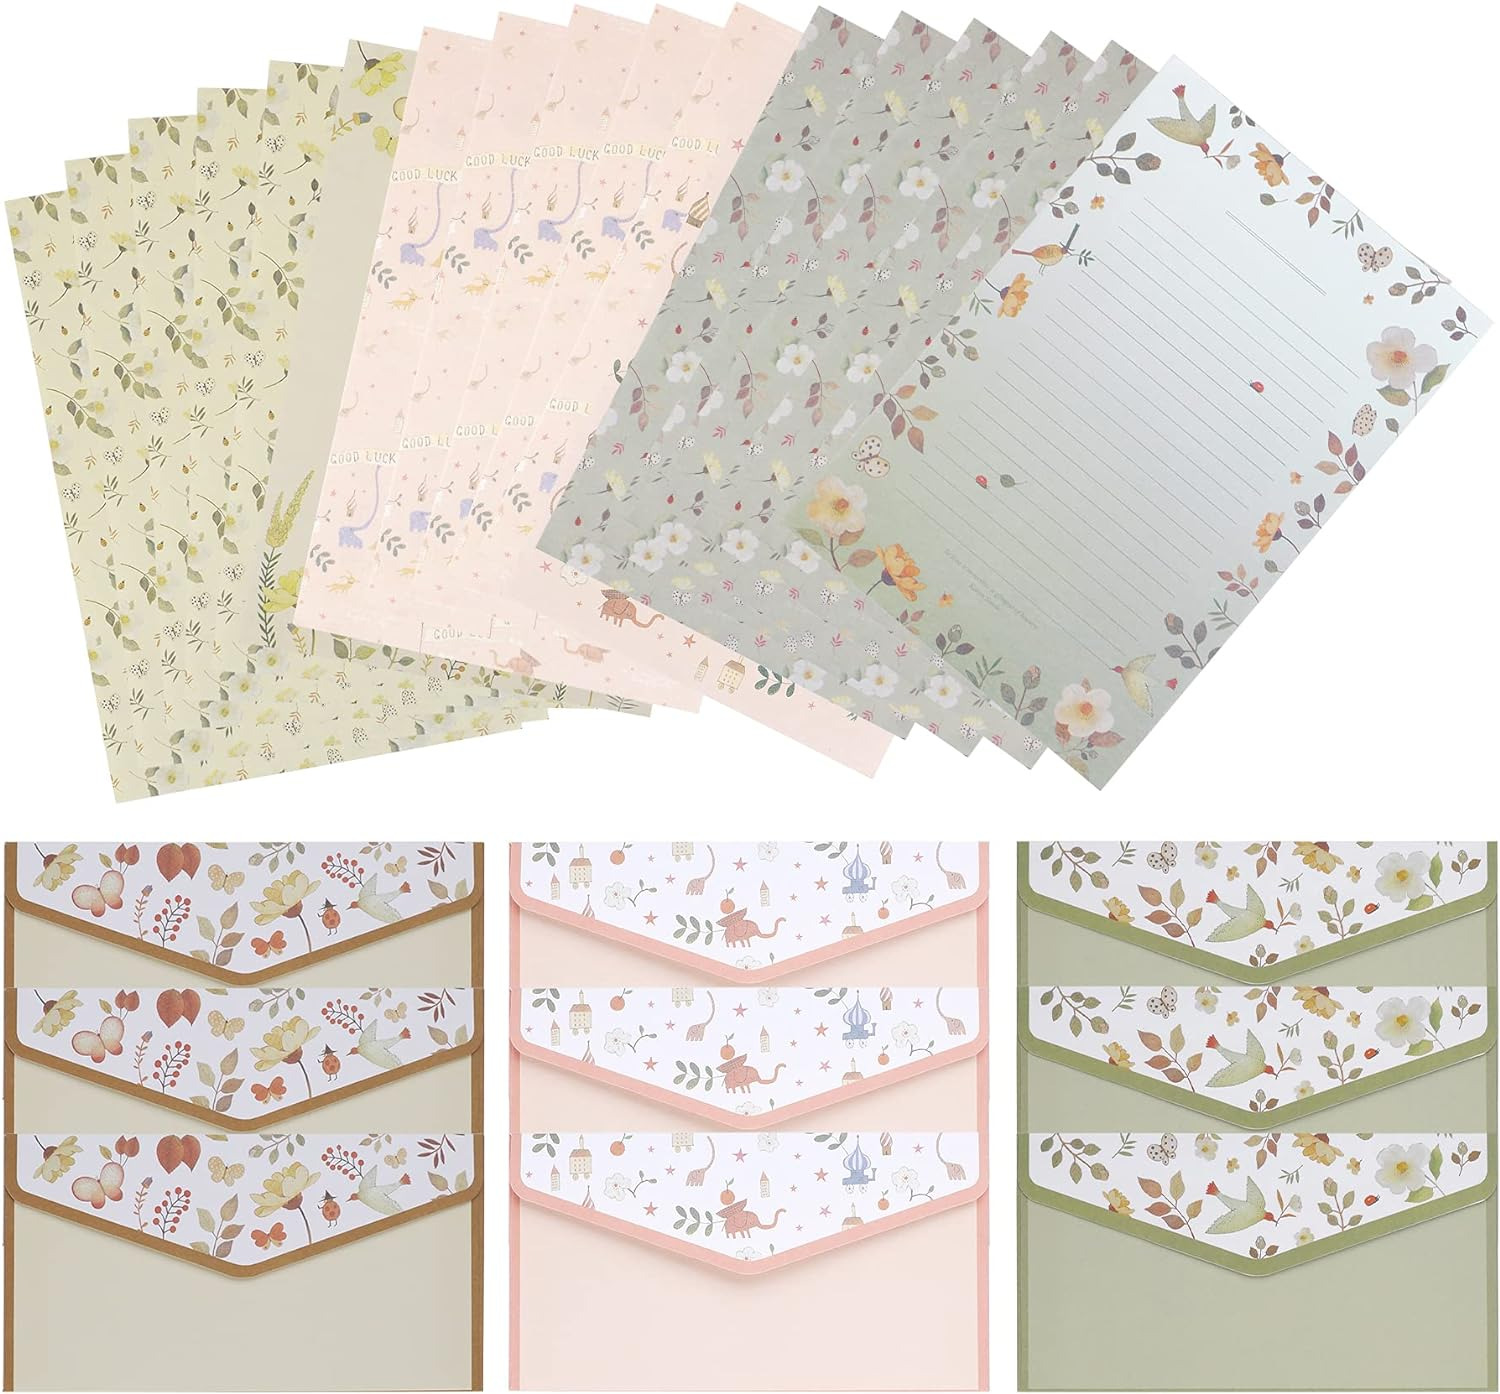 27 PCS Stationary Writing Paper with Envelopes Set Cute Vintage